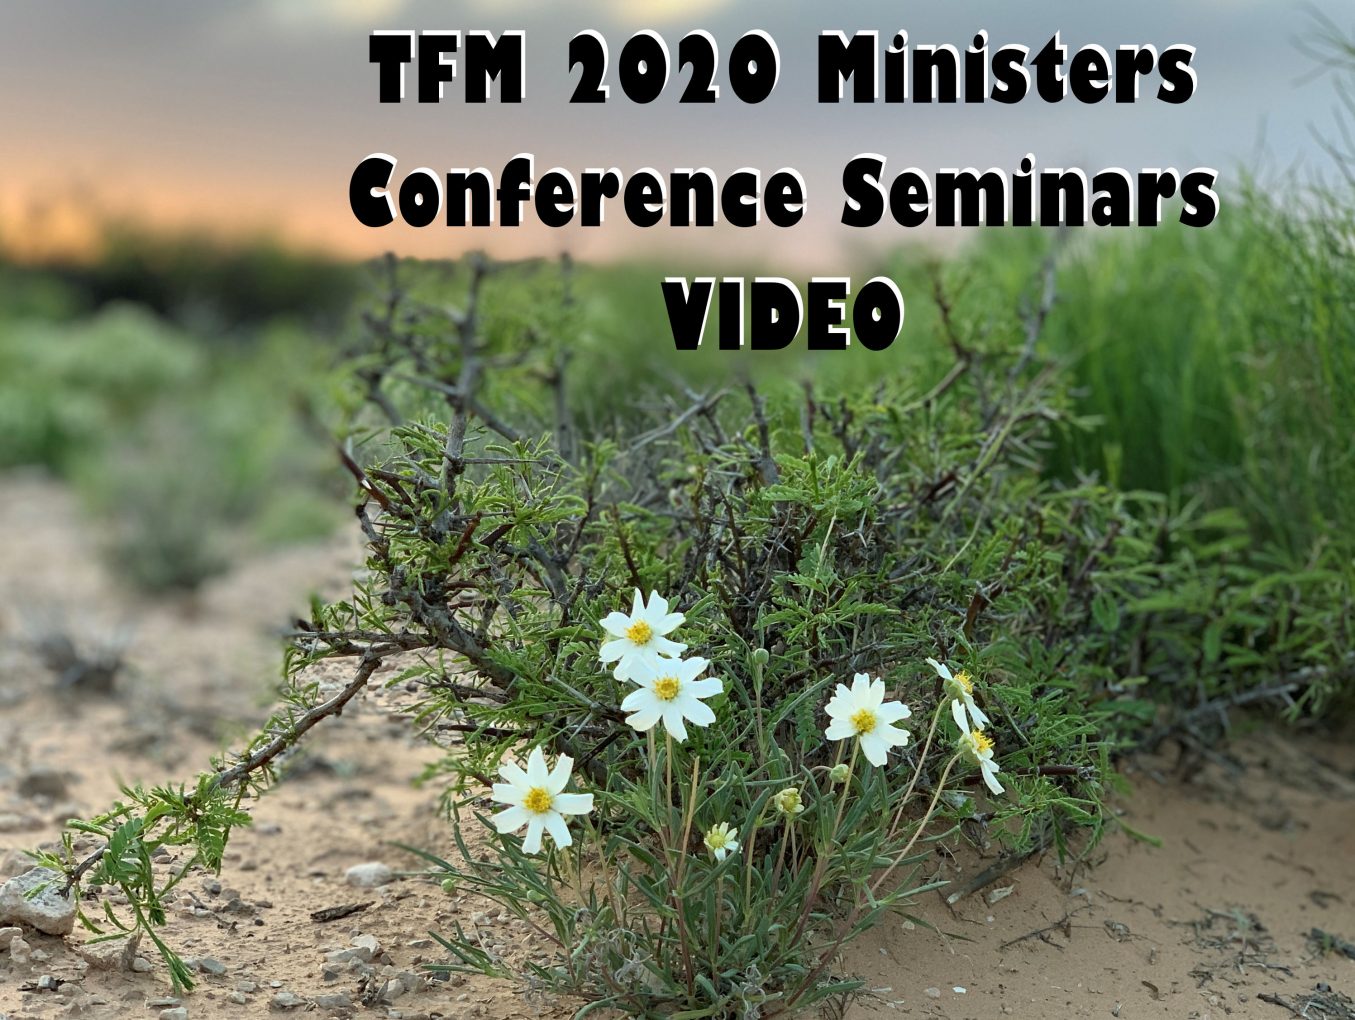 2020 Ministers Conference Seminars - VIDEOS